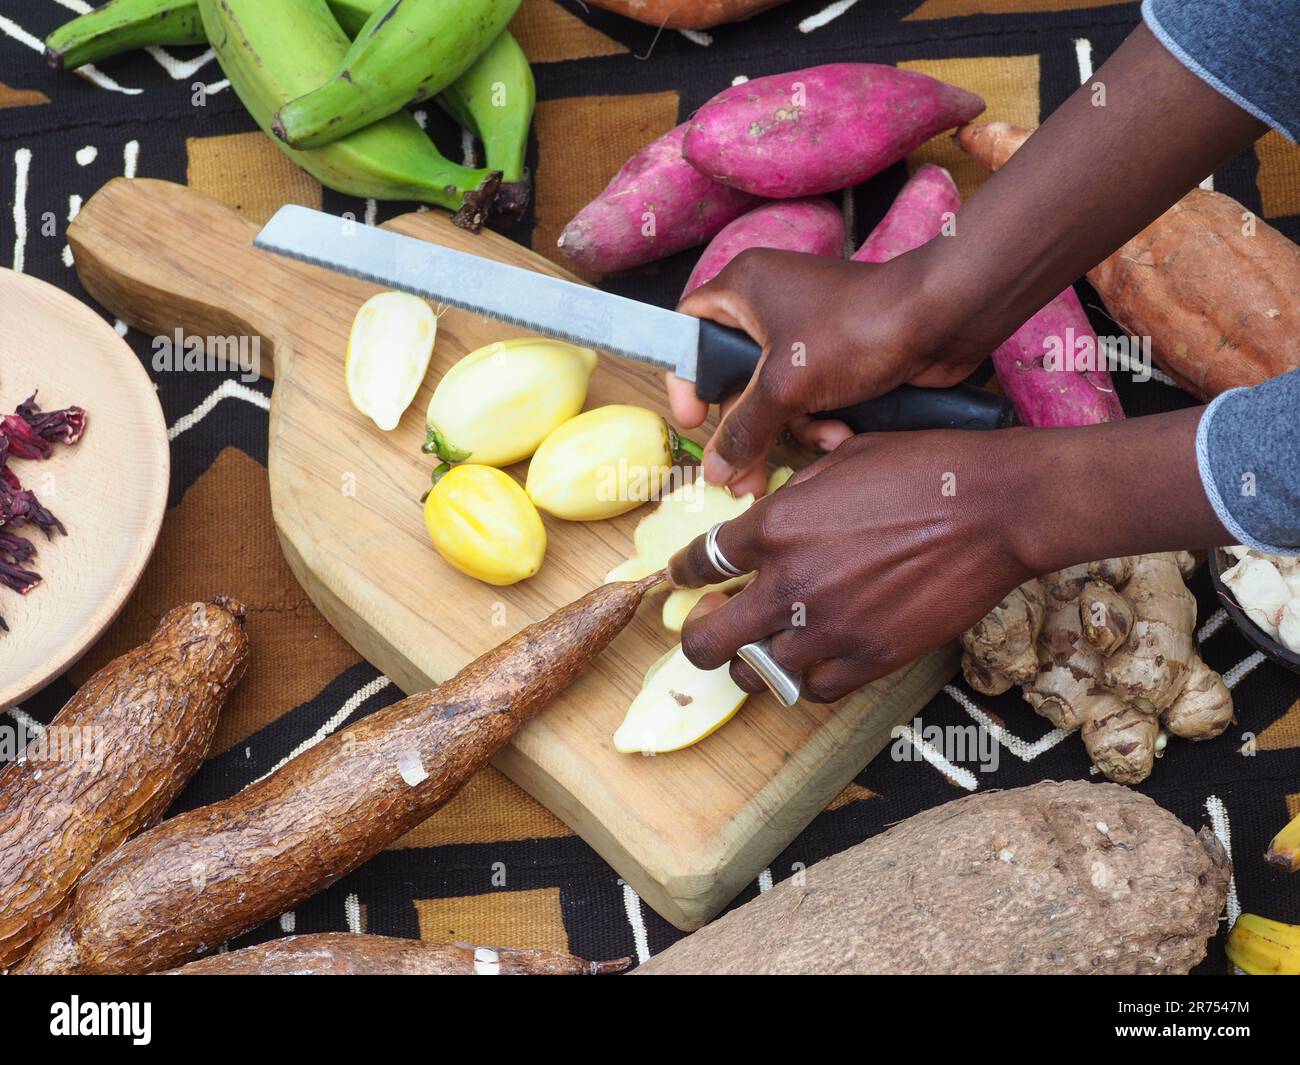 black woman cutting typical african veggies and fruits, overhead shot. Cooking Ivory coast local food. Stock Photo